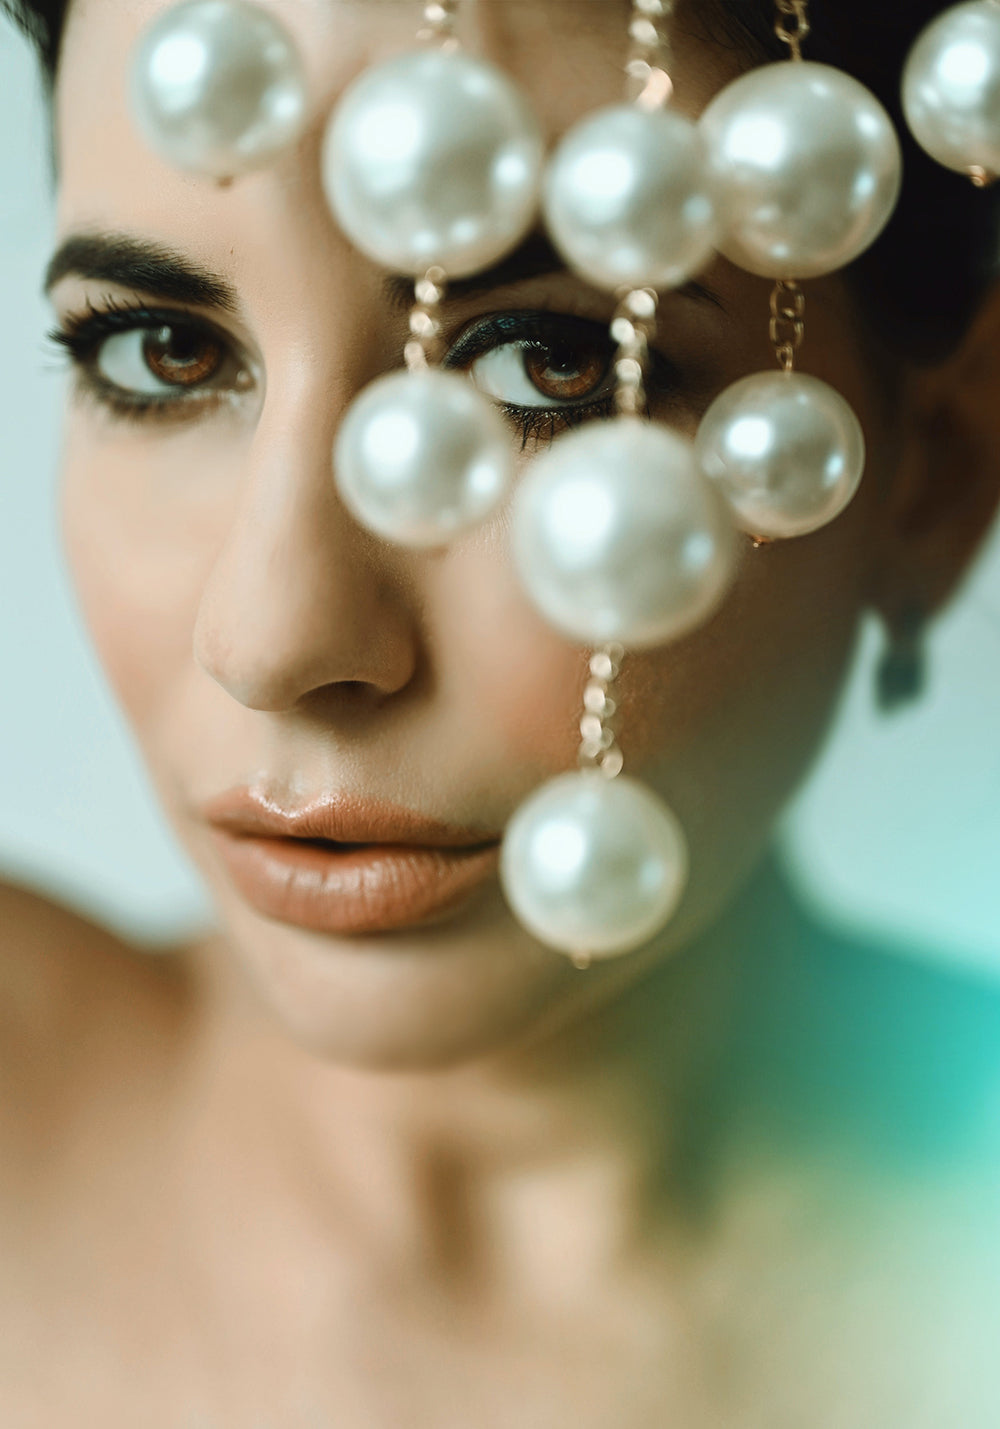 Learn How to Examine Pearls